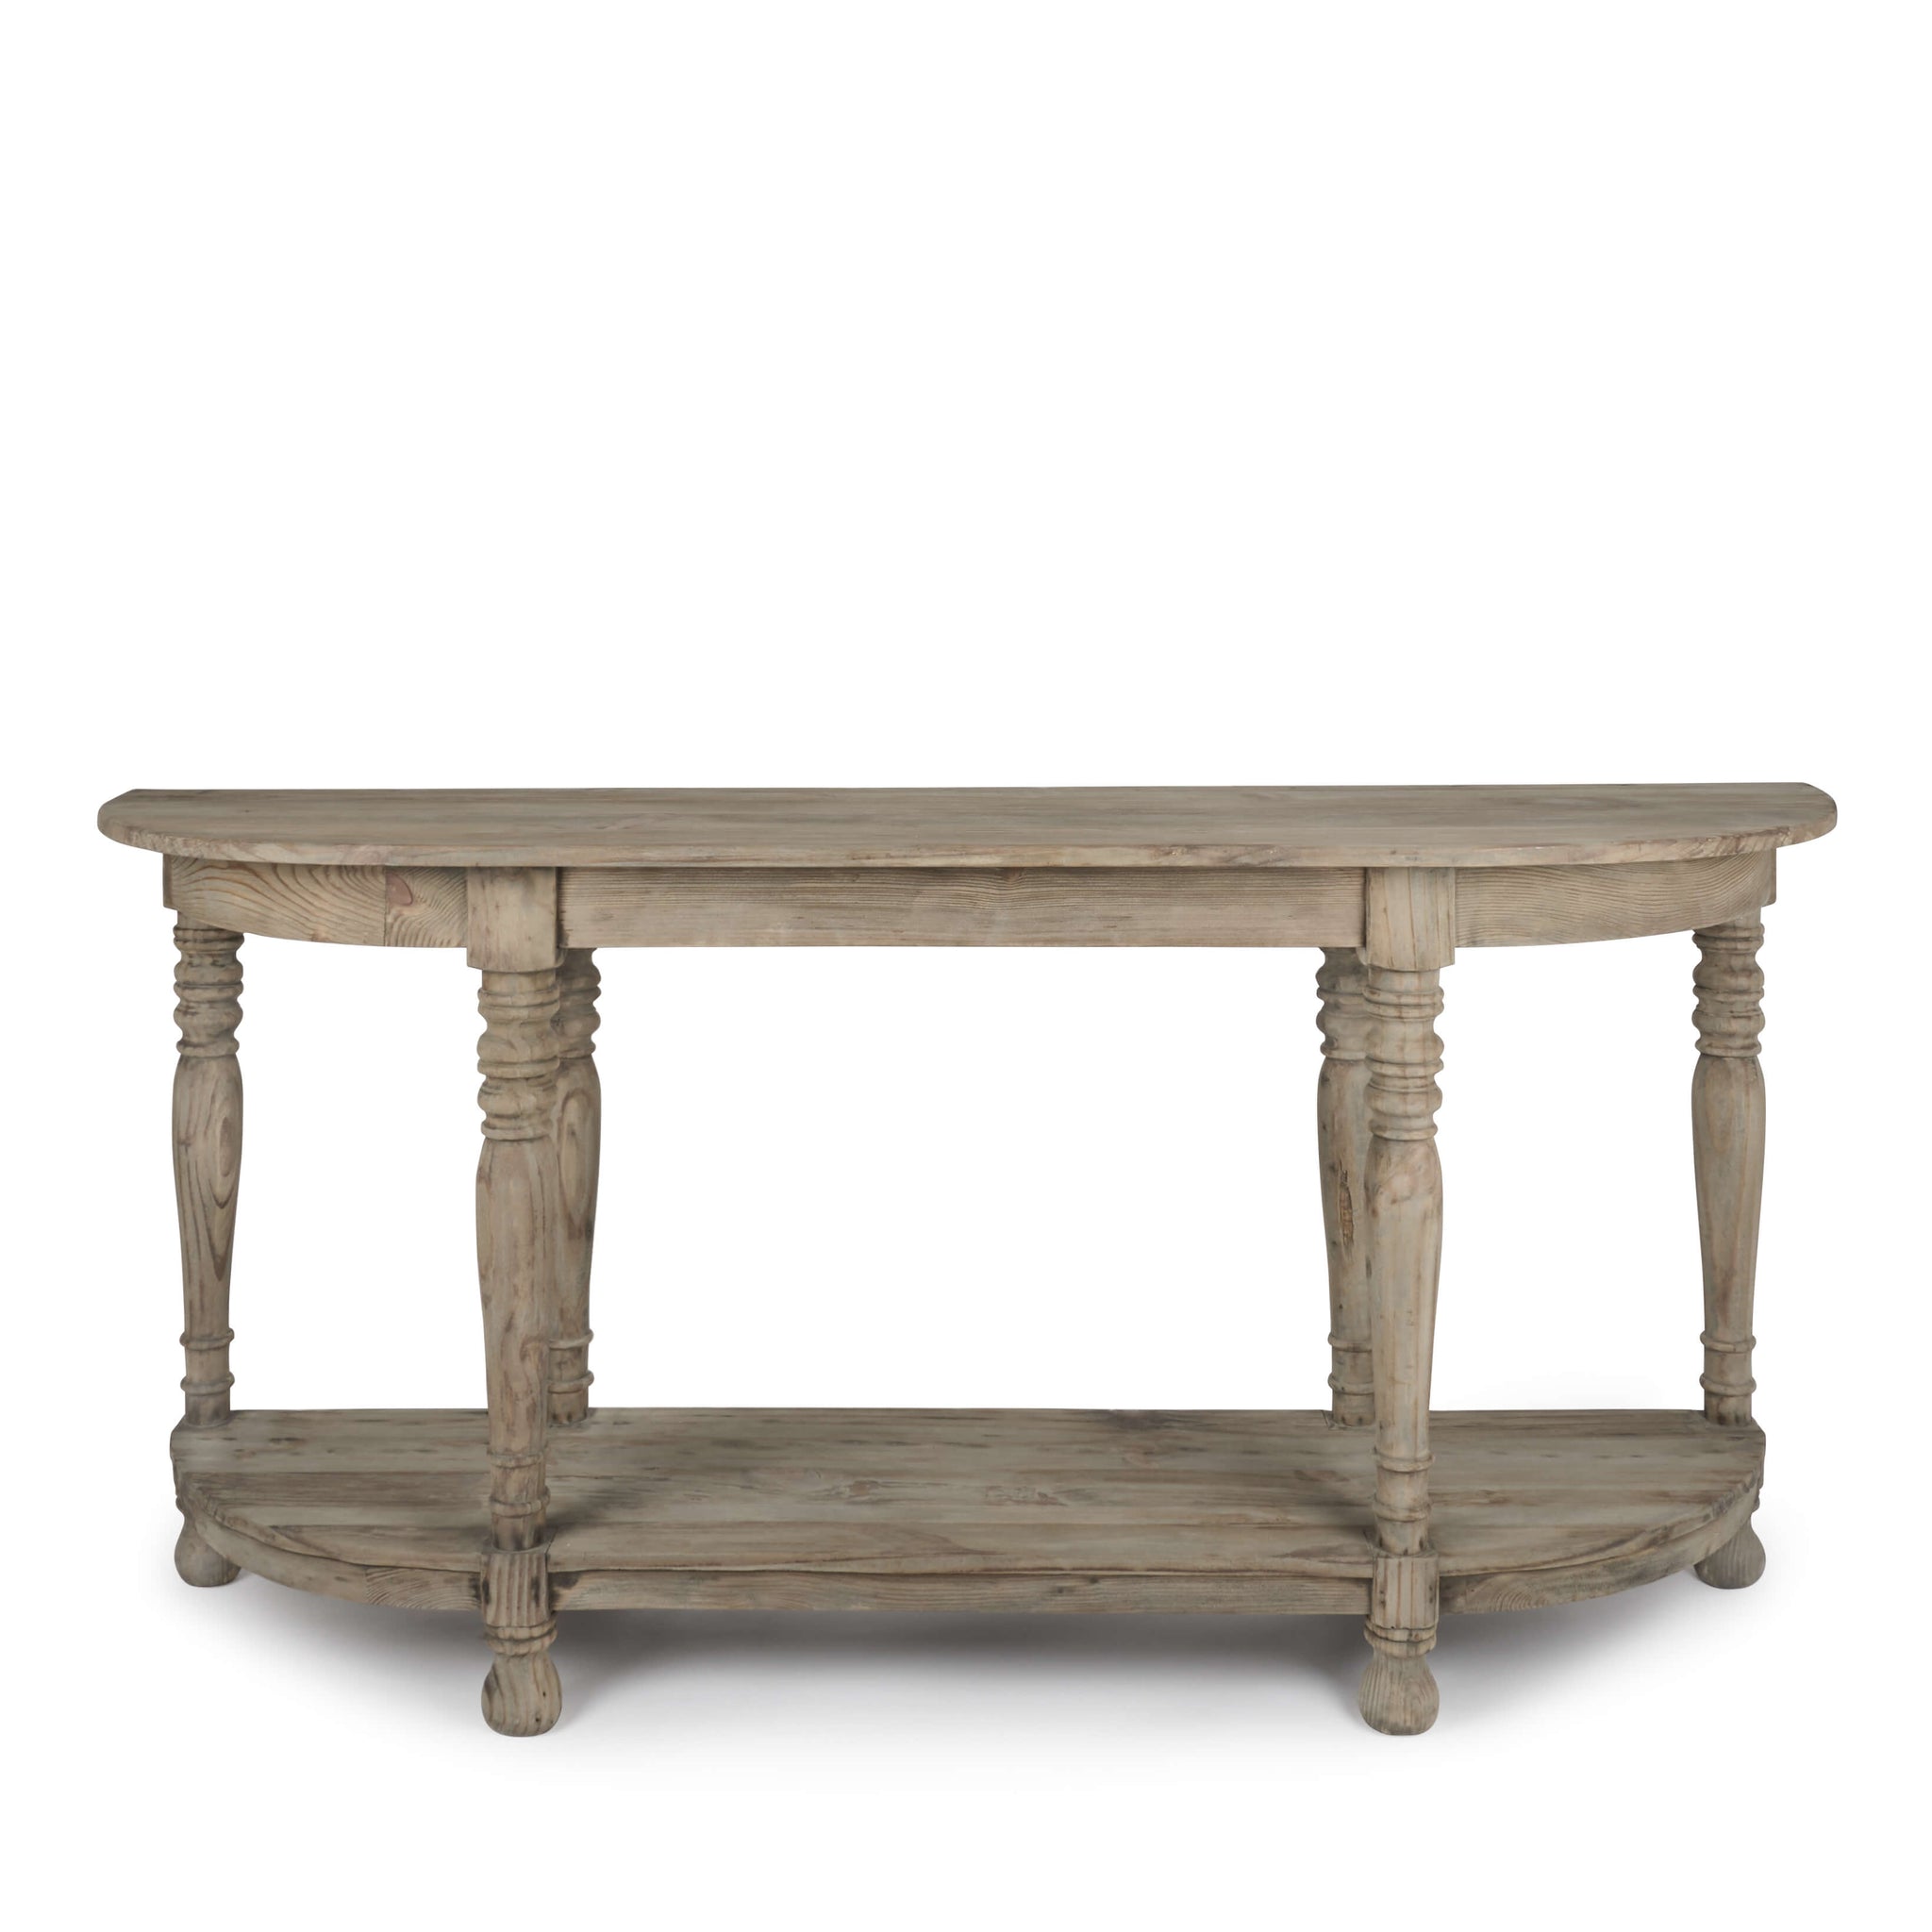 Sophie Allport Witham Console Table